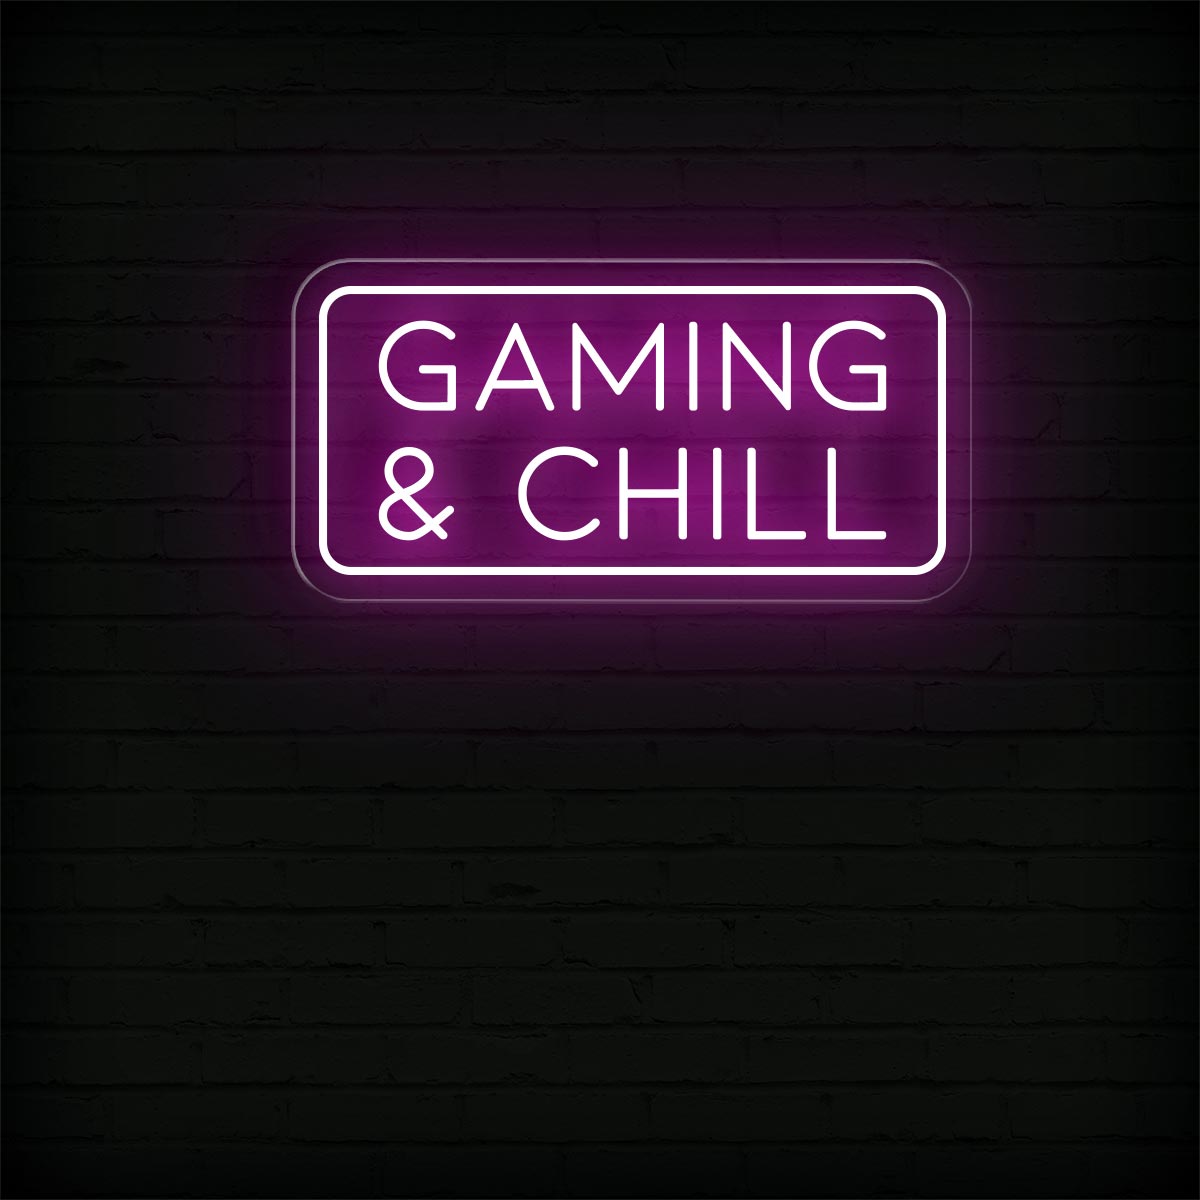 Gaming & Chill Neon Sign - Cozy Game Room Lighting - NEONXPERT